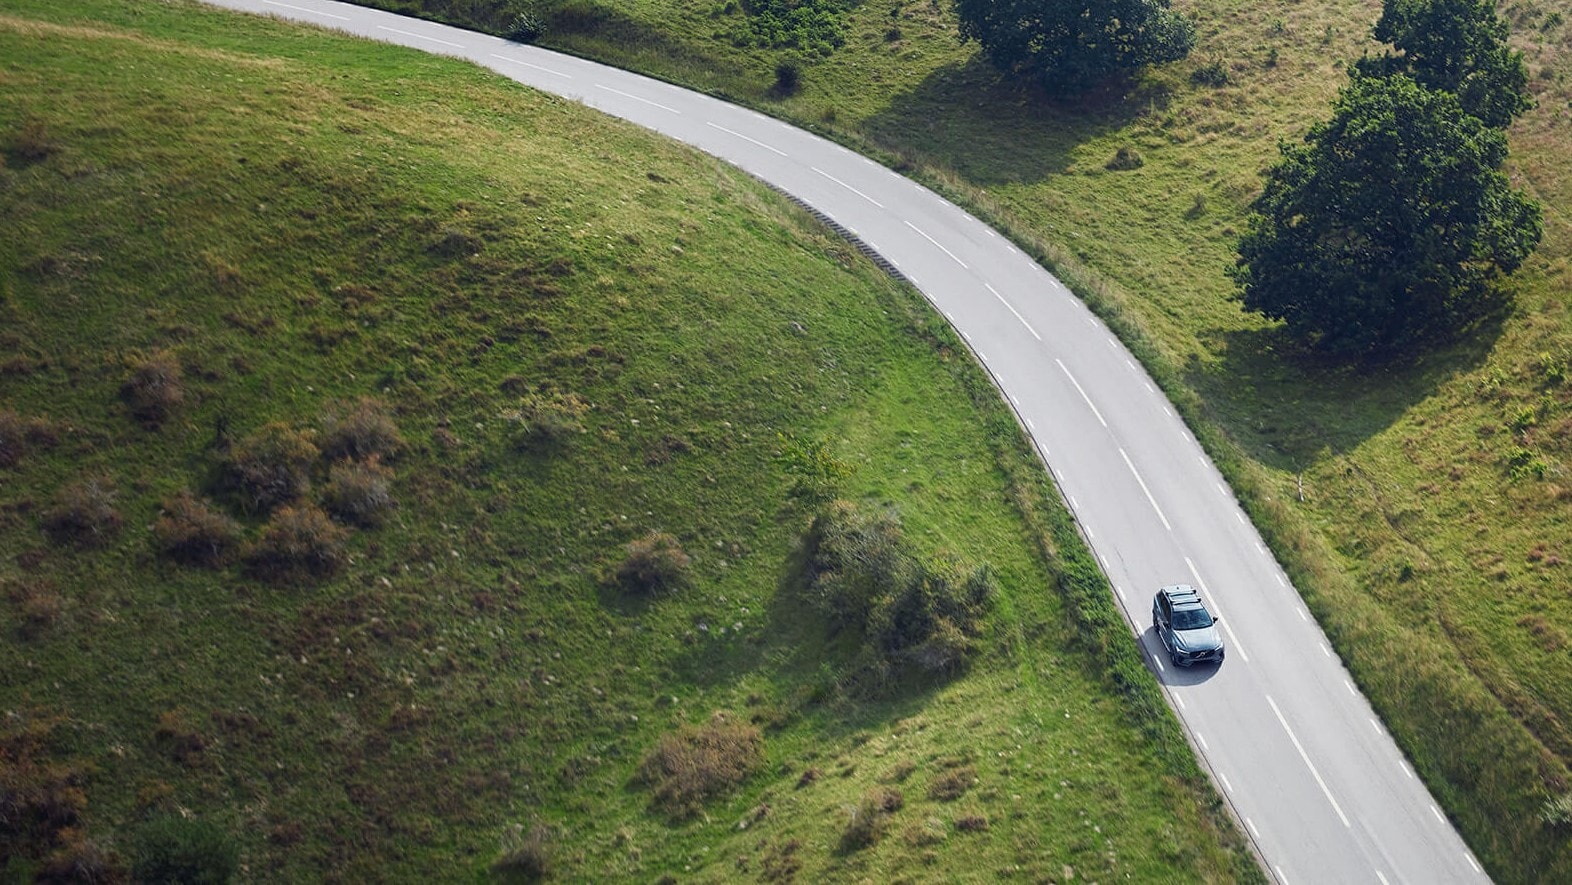 A Volvo is seen moving along a path of beautiful greenery from above.